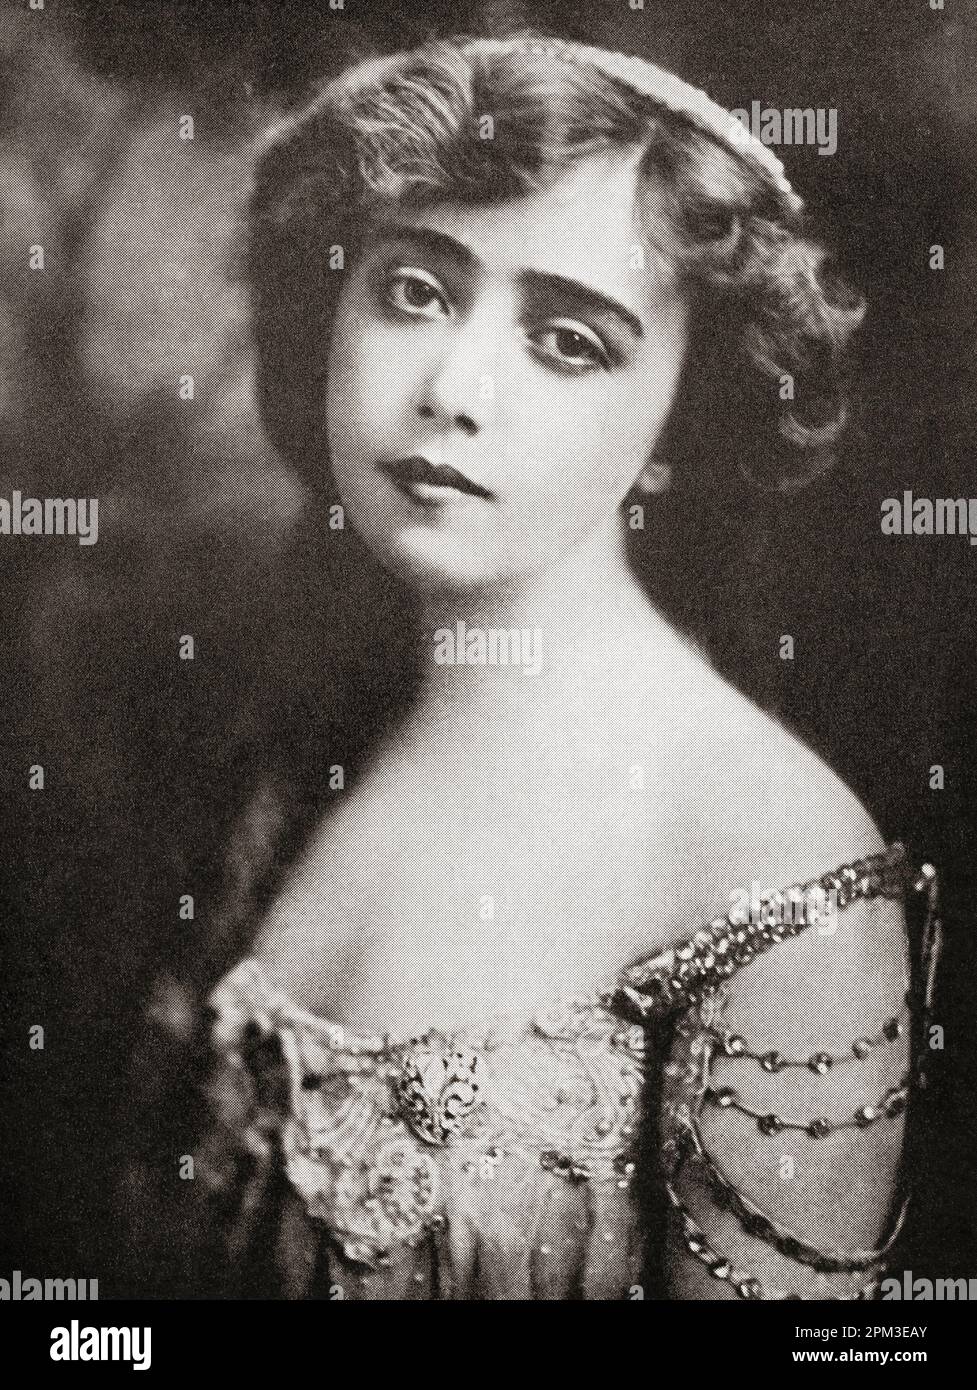 May Alvos de Sousa, 1884 - 1948.  American singer and Broadway actress.  Seen here in 1900 shortly after she introduced Bathhouse John's ballad, 'Dear Midnight of Love' at the Chicago Opera House.  From Lords of the Levee, published 1943. Stock Photo